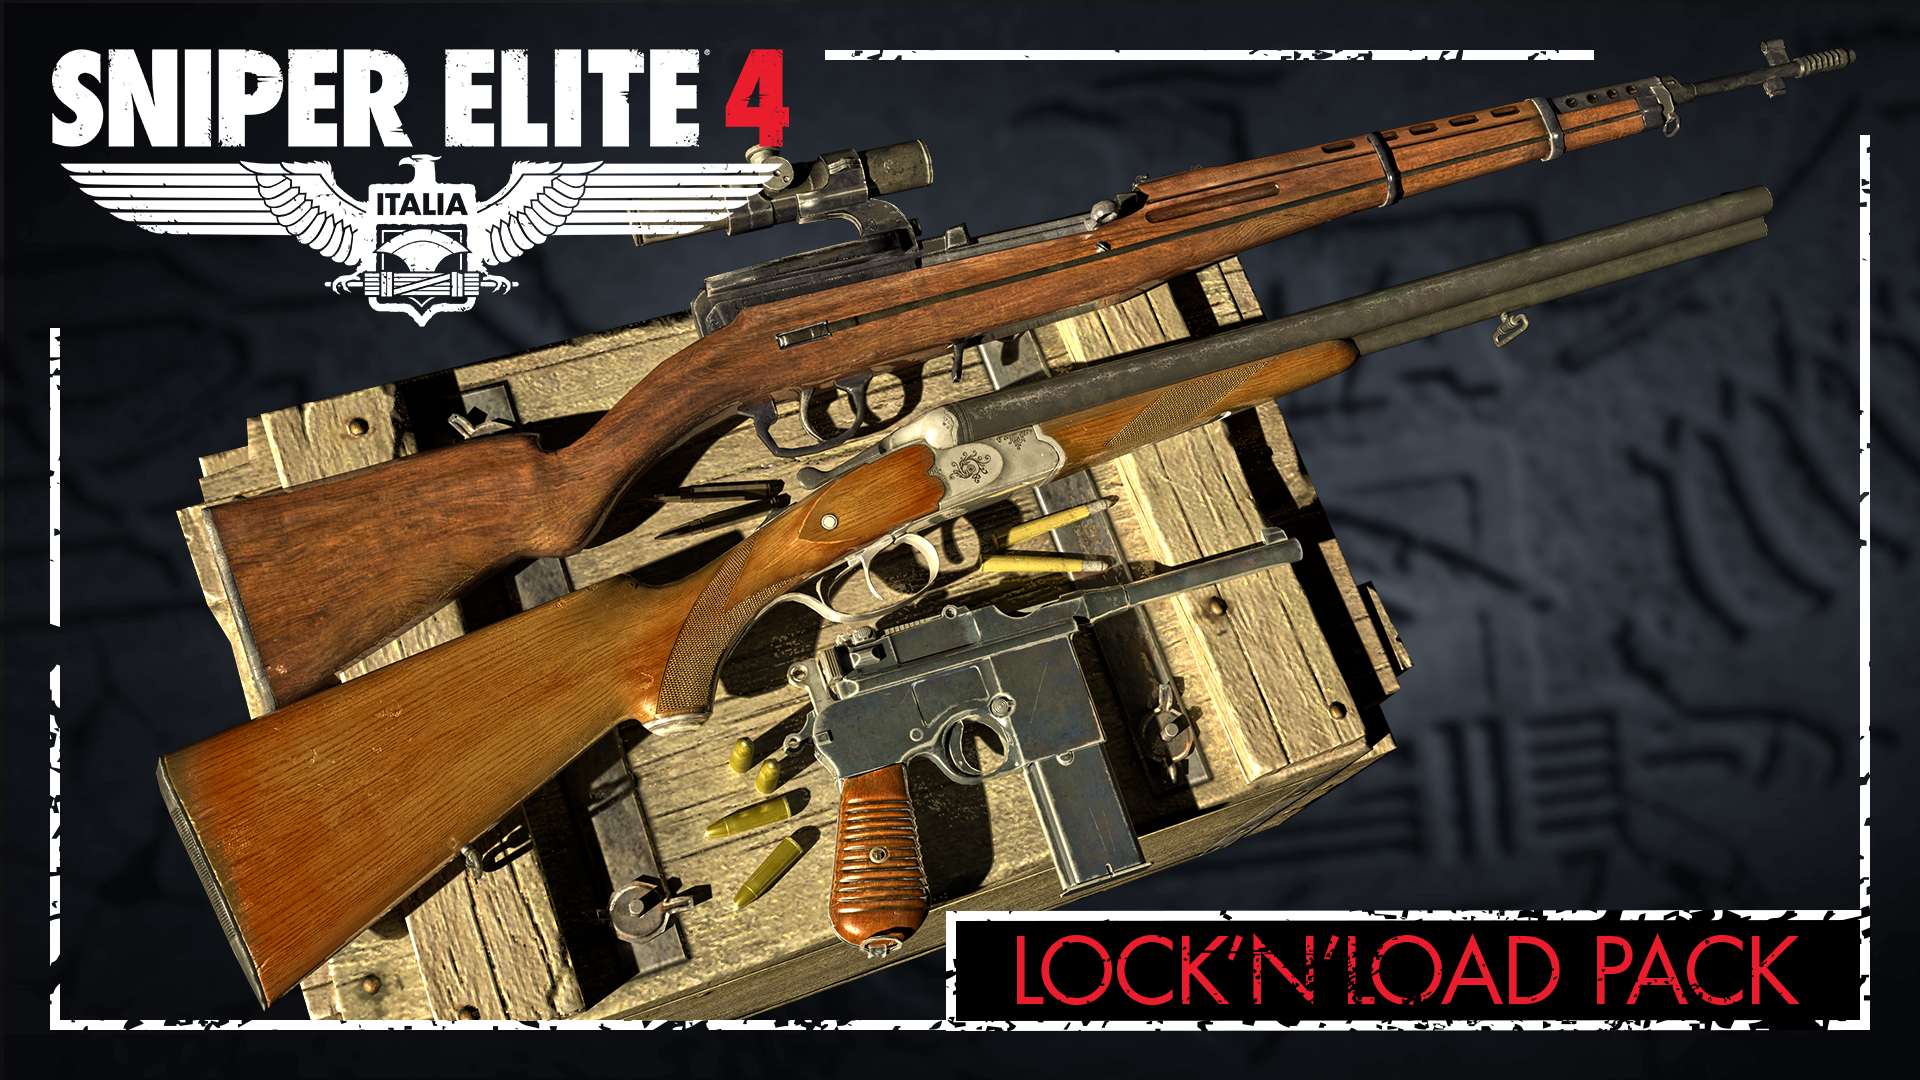 Sniper Elite 4 - Lock and Load Weapons Pack DLC Steam CD Key [USD 4.51]